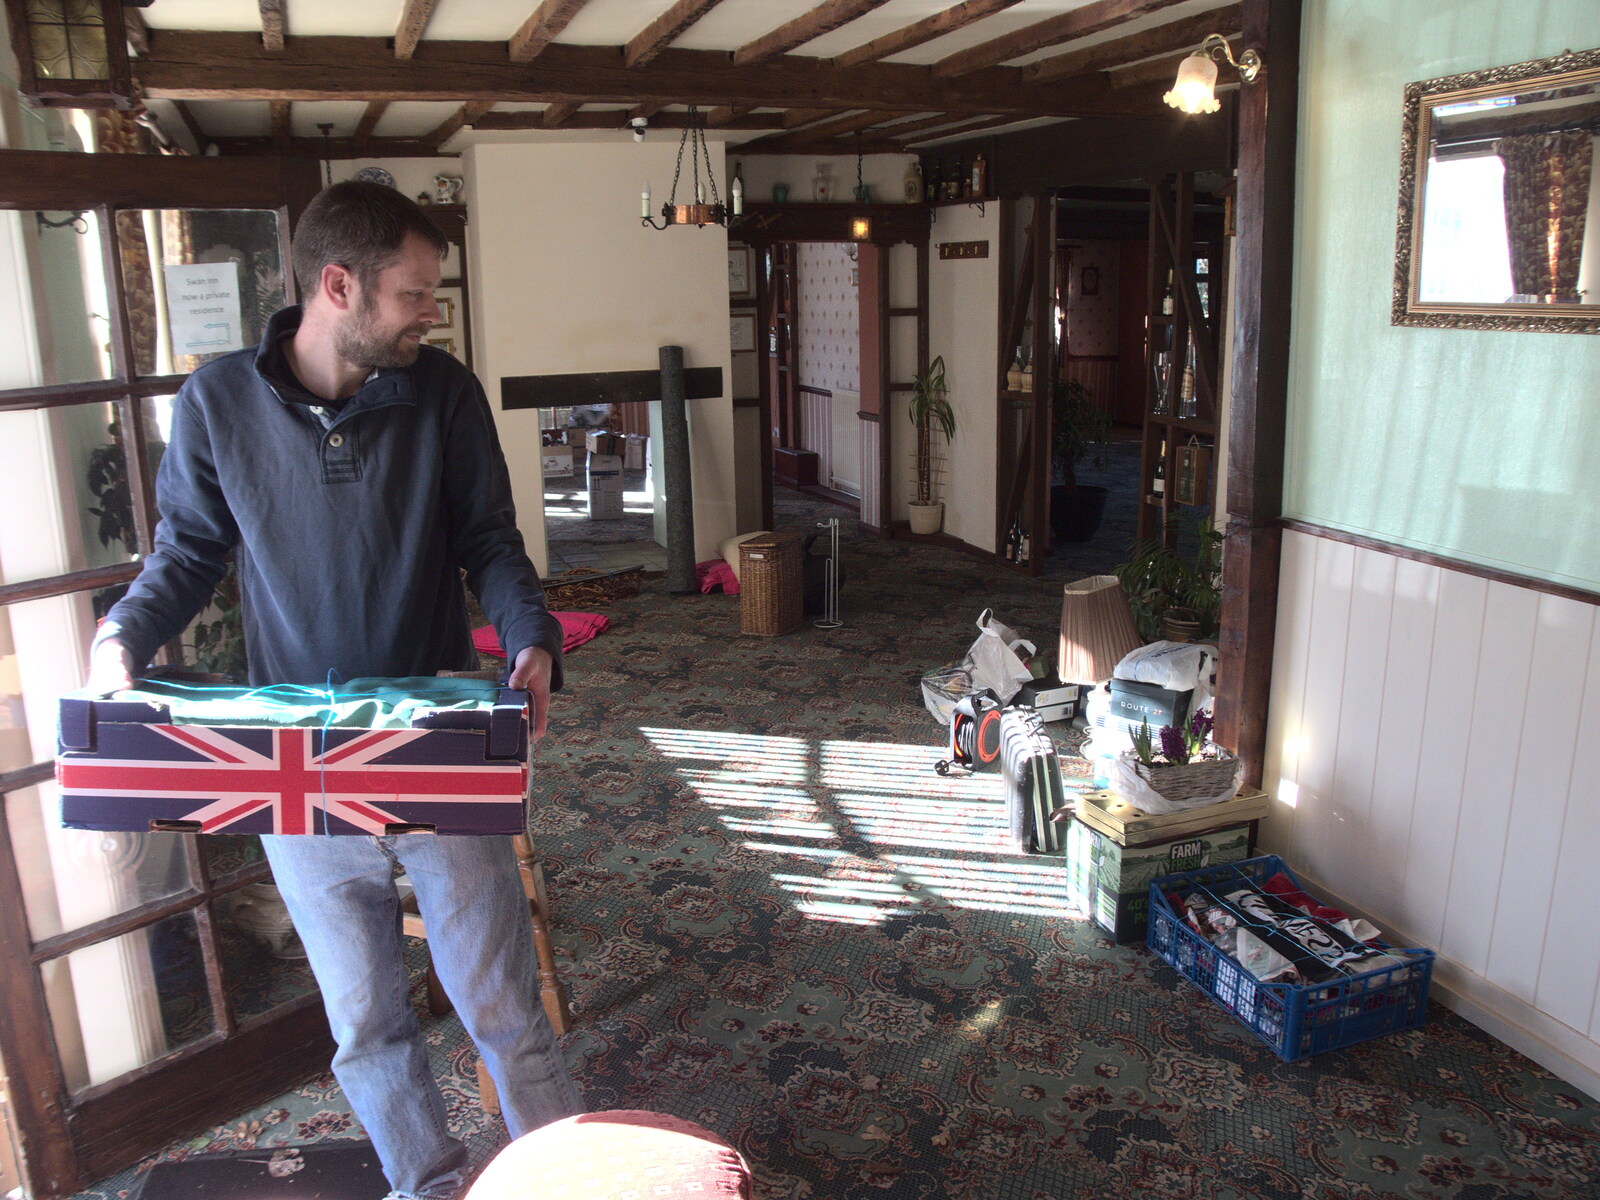 The Boy Phil roams around with a box from The Swan Inn: An Epilogue, Brome, Suffolk - 17th February 2022